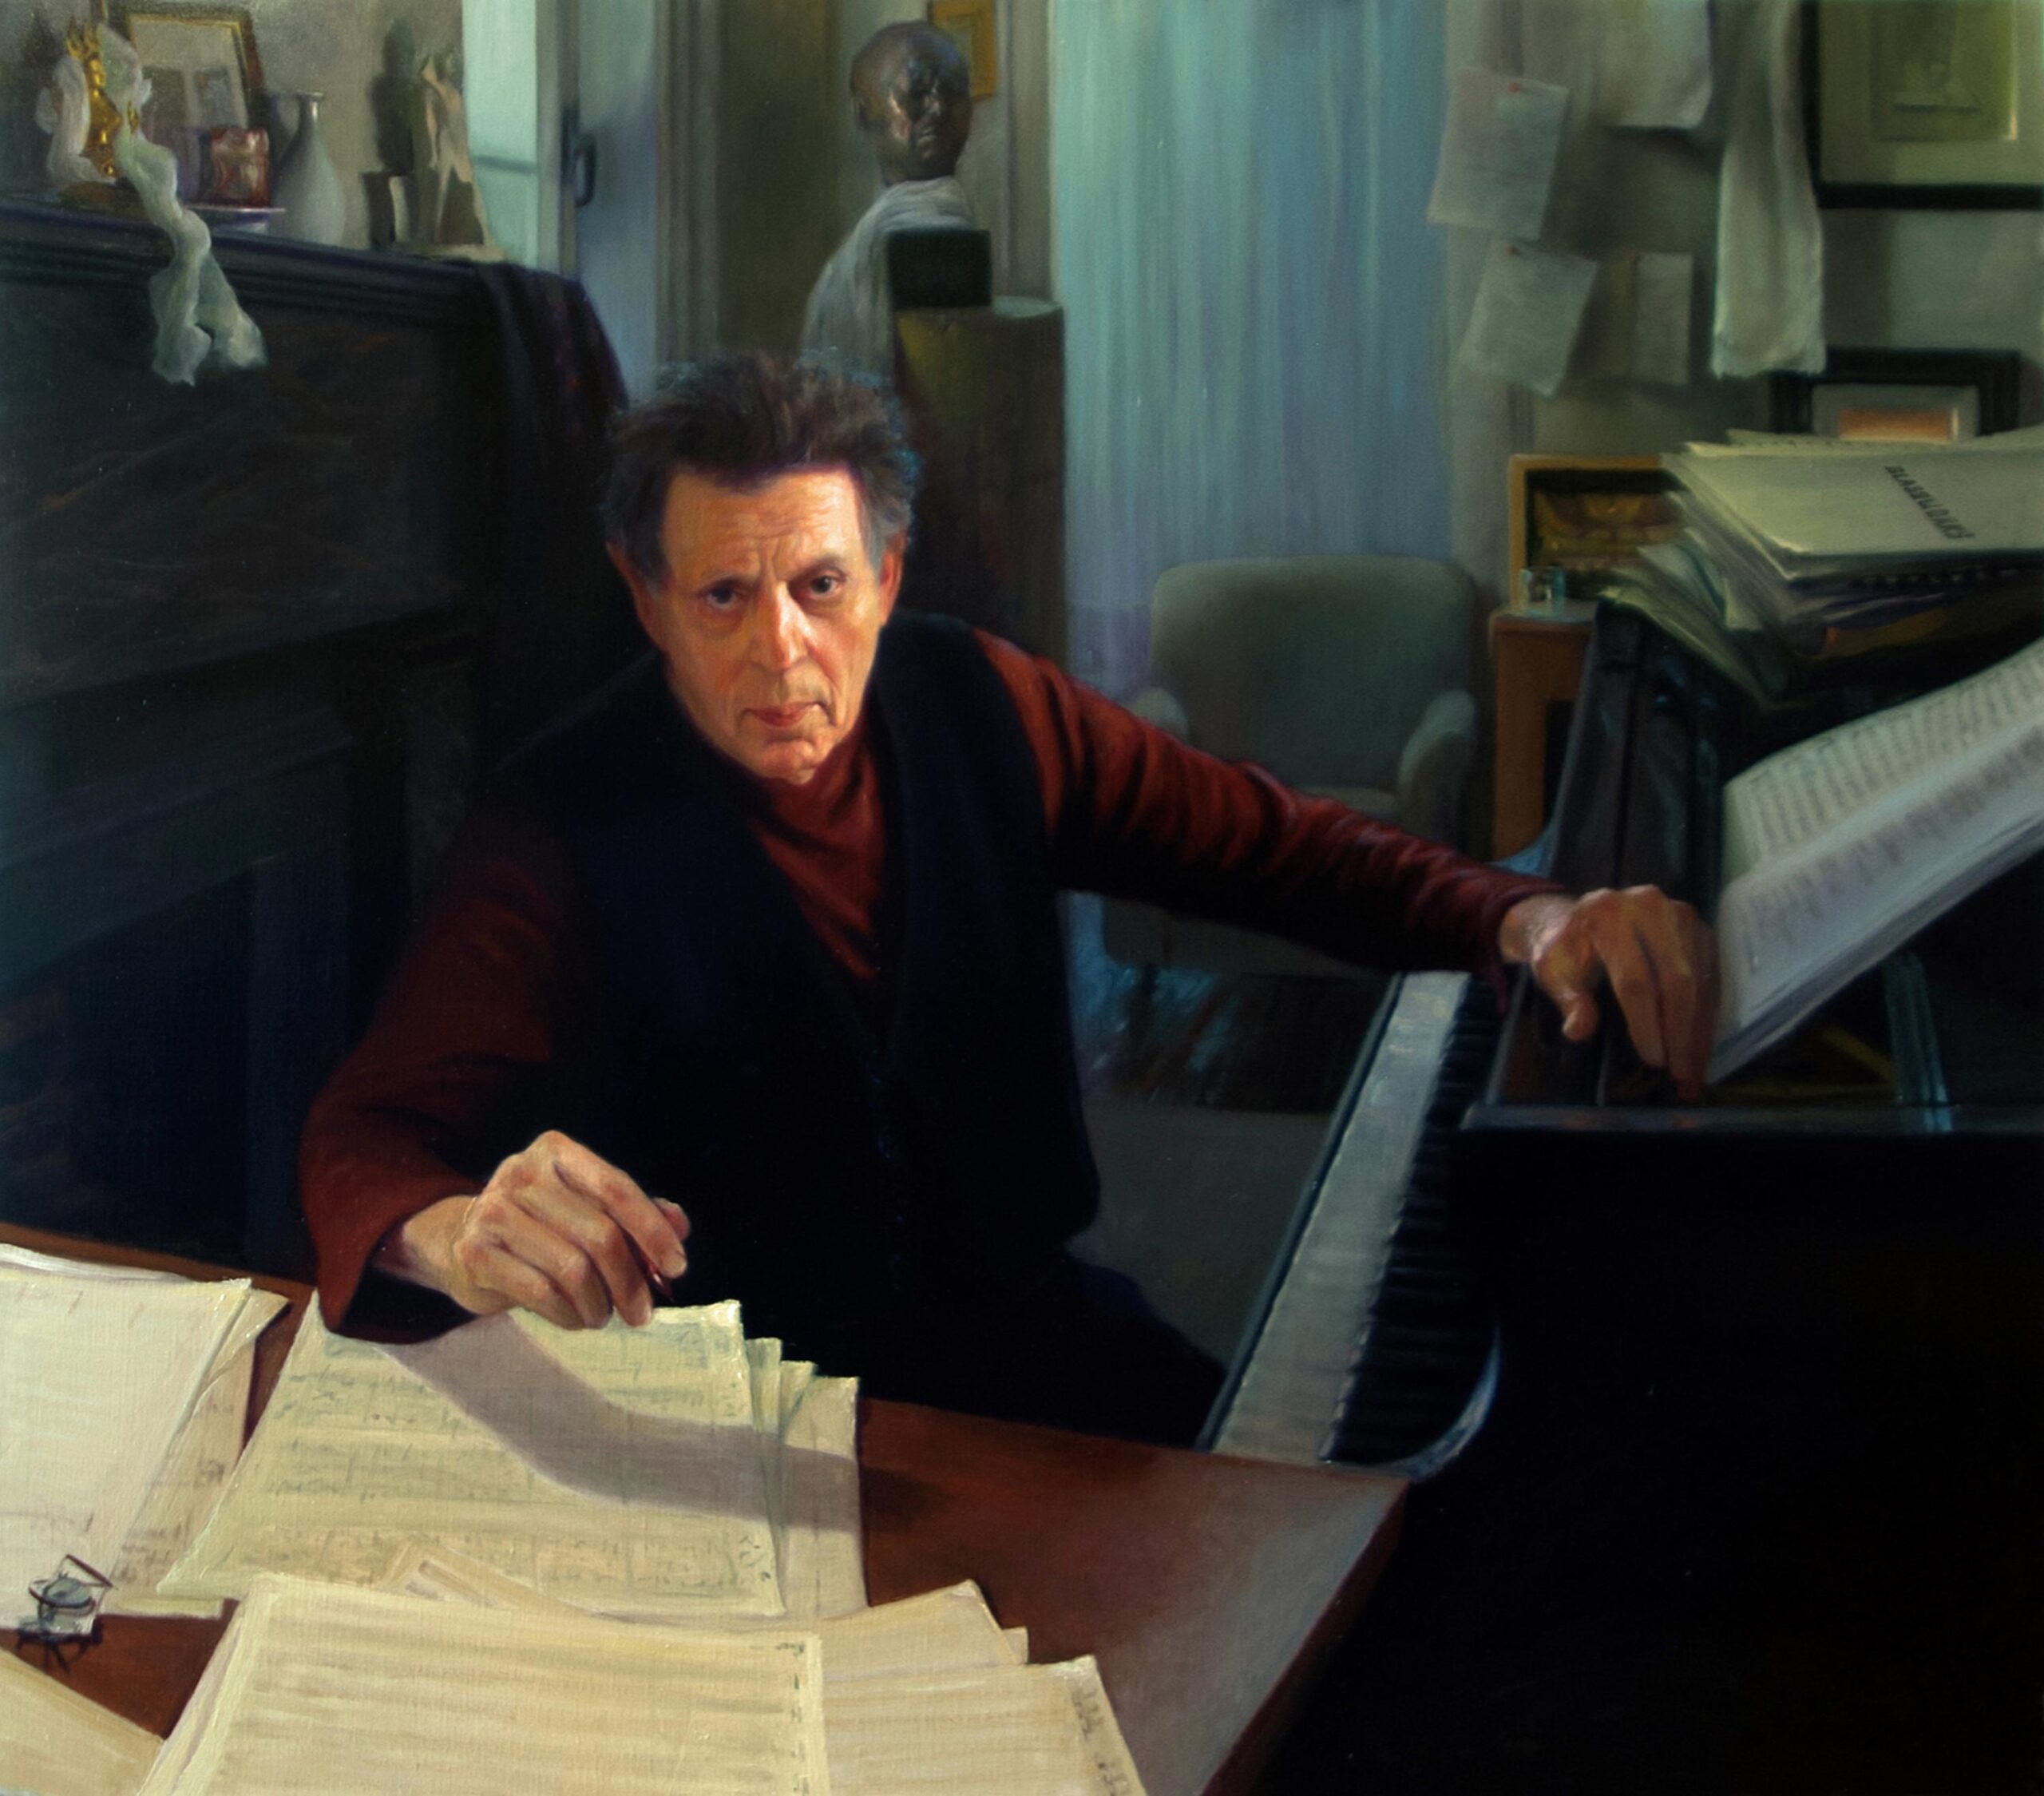 representational portraits - Luis Alvarez Roure, "Philip Glass," 2016, oil on linen, 46 x 52 in., available from the artist